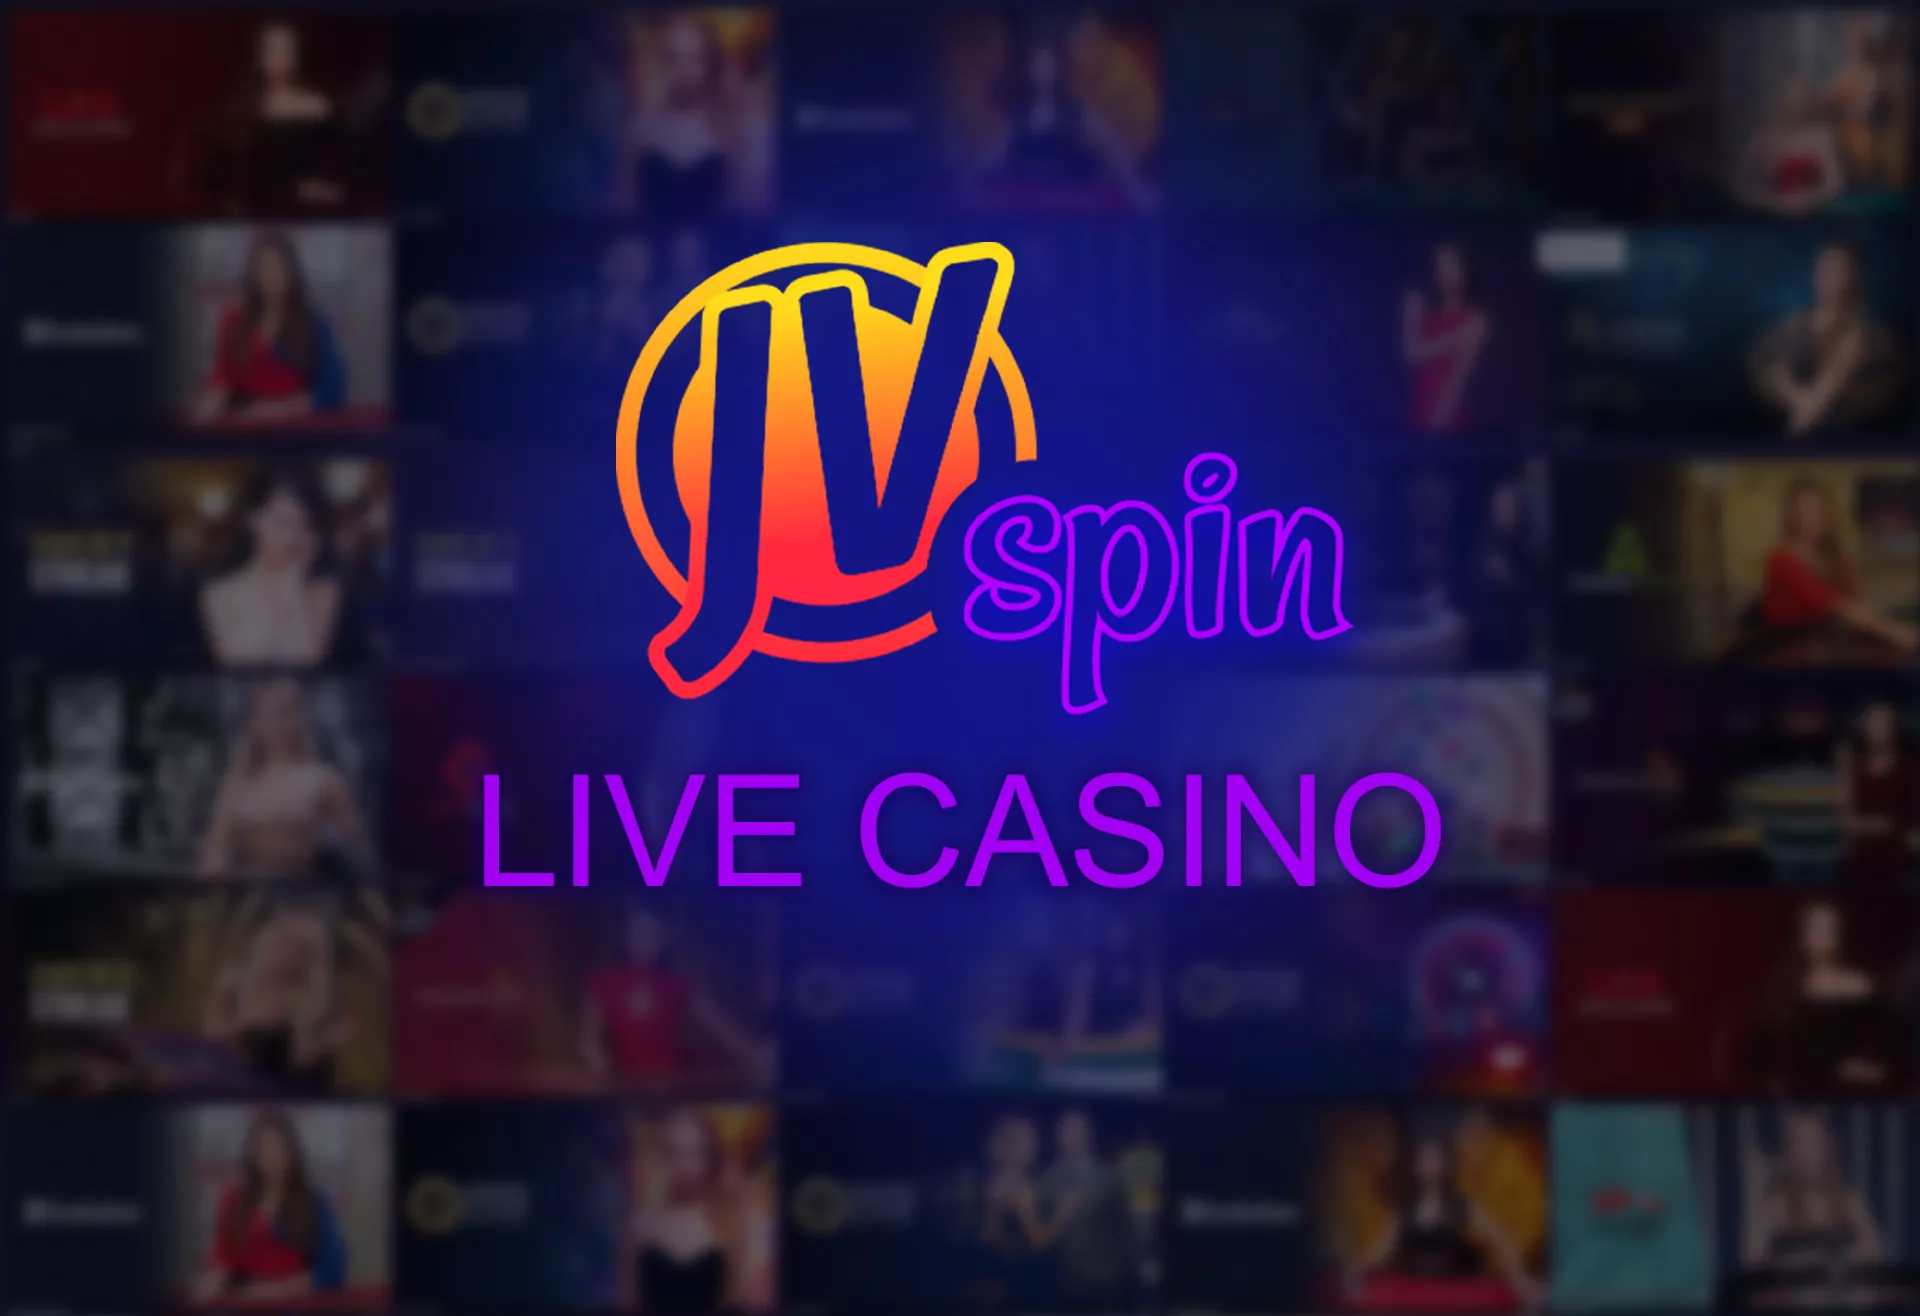 At online casino you can play with a live dealer.